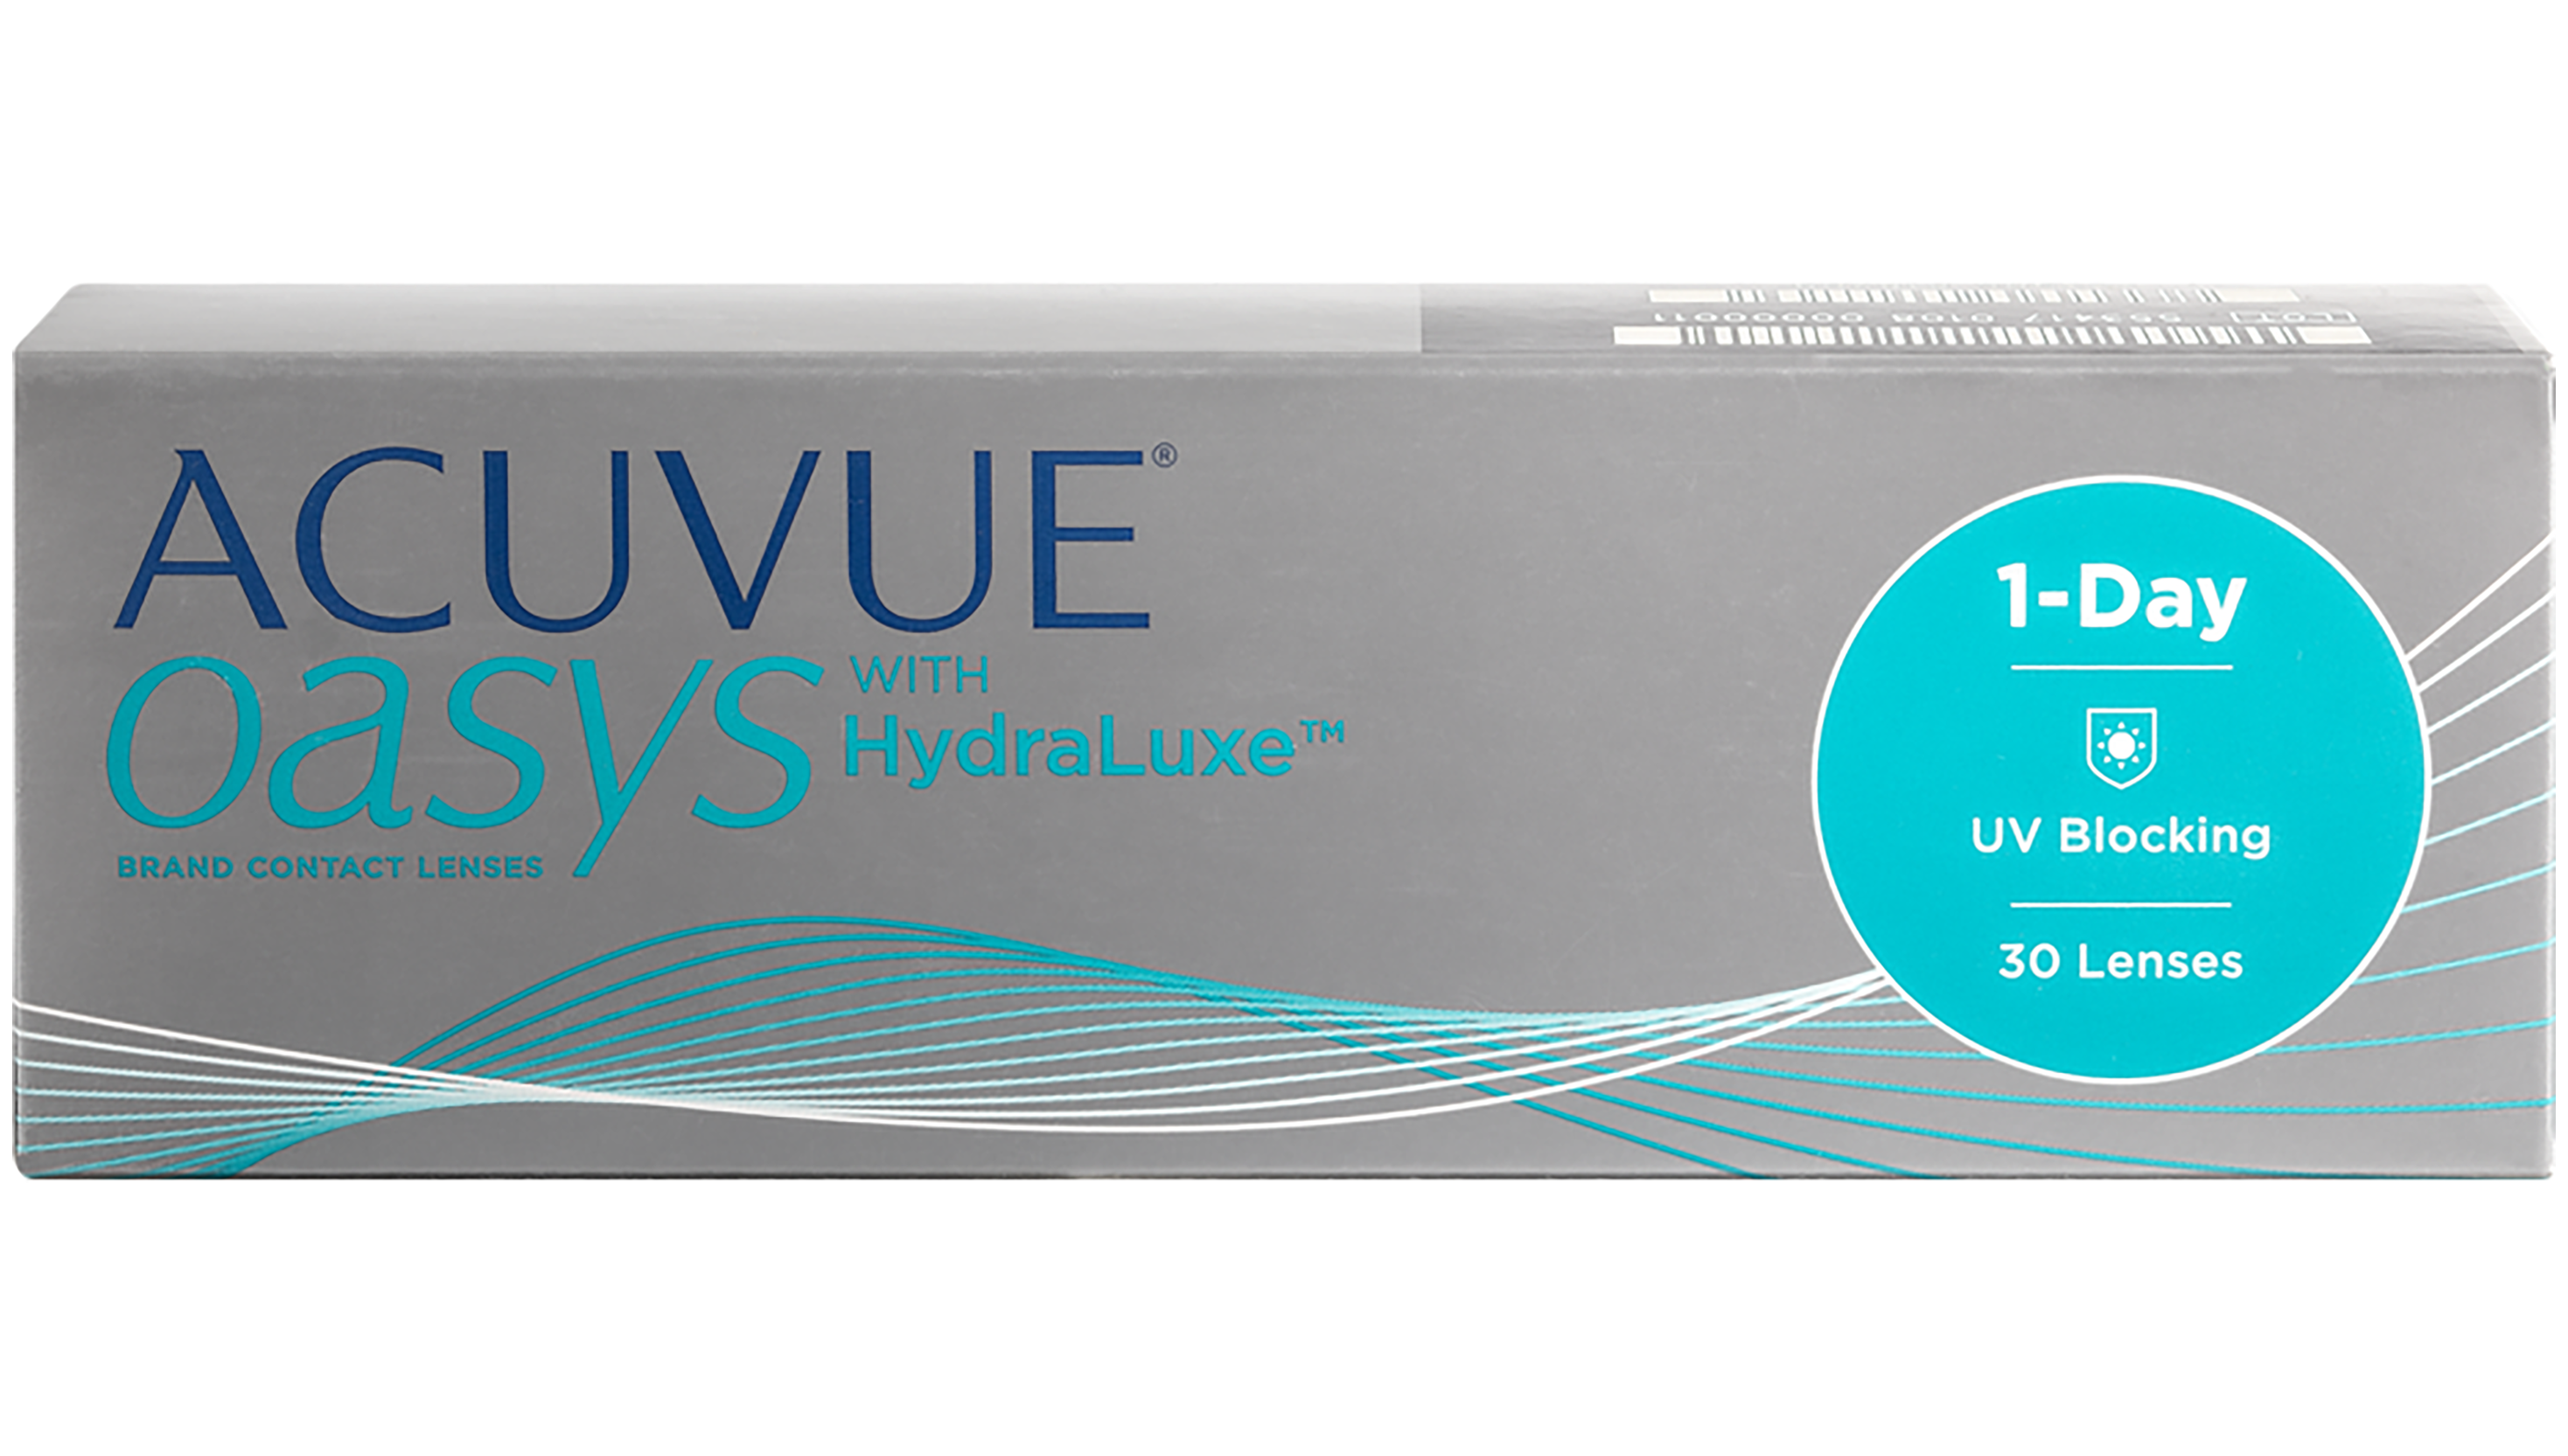 Front 1 Day Acuvue Oasys